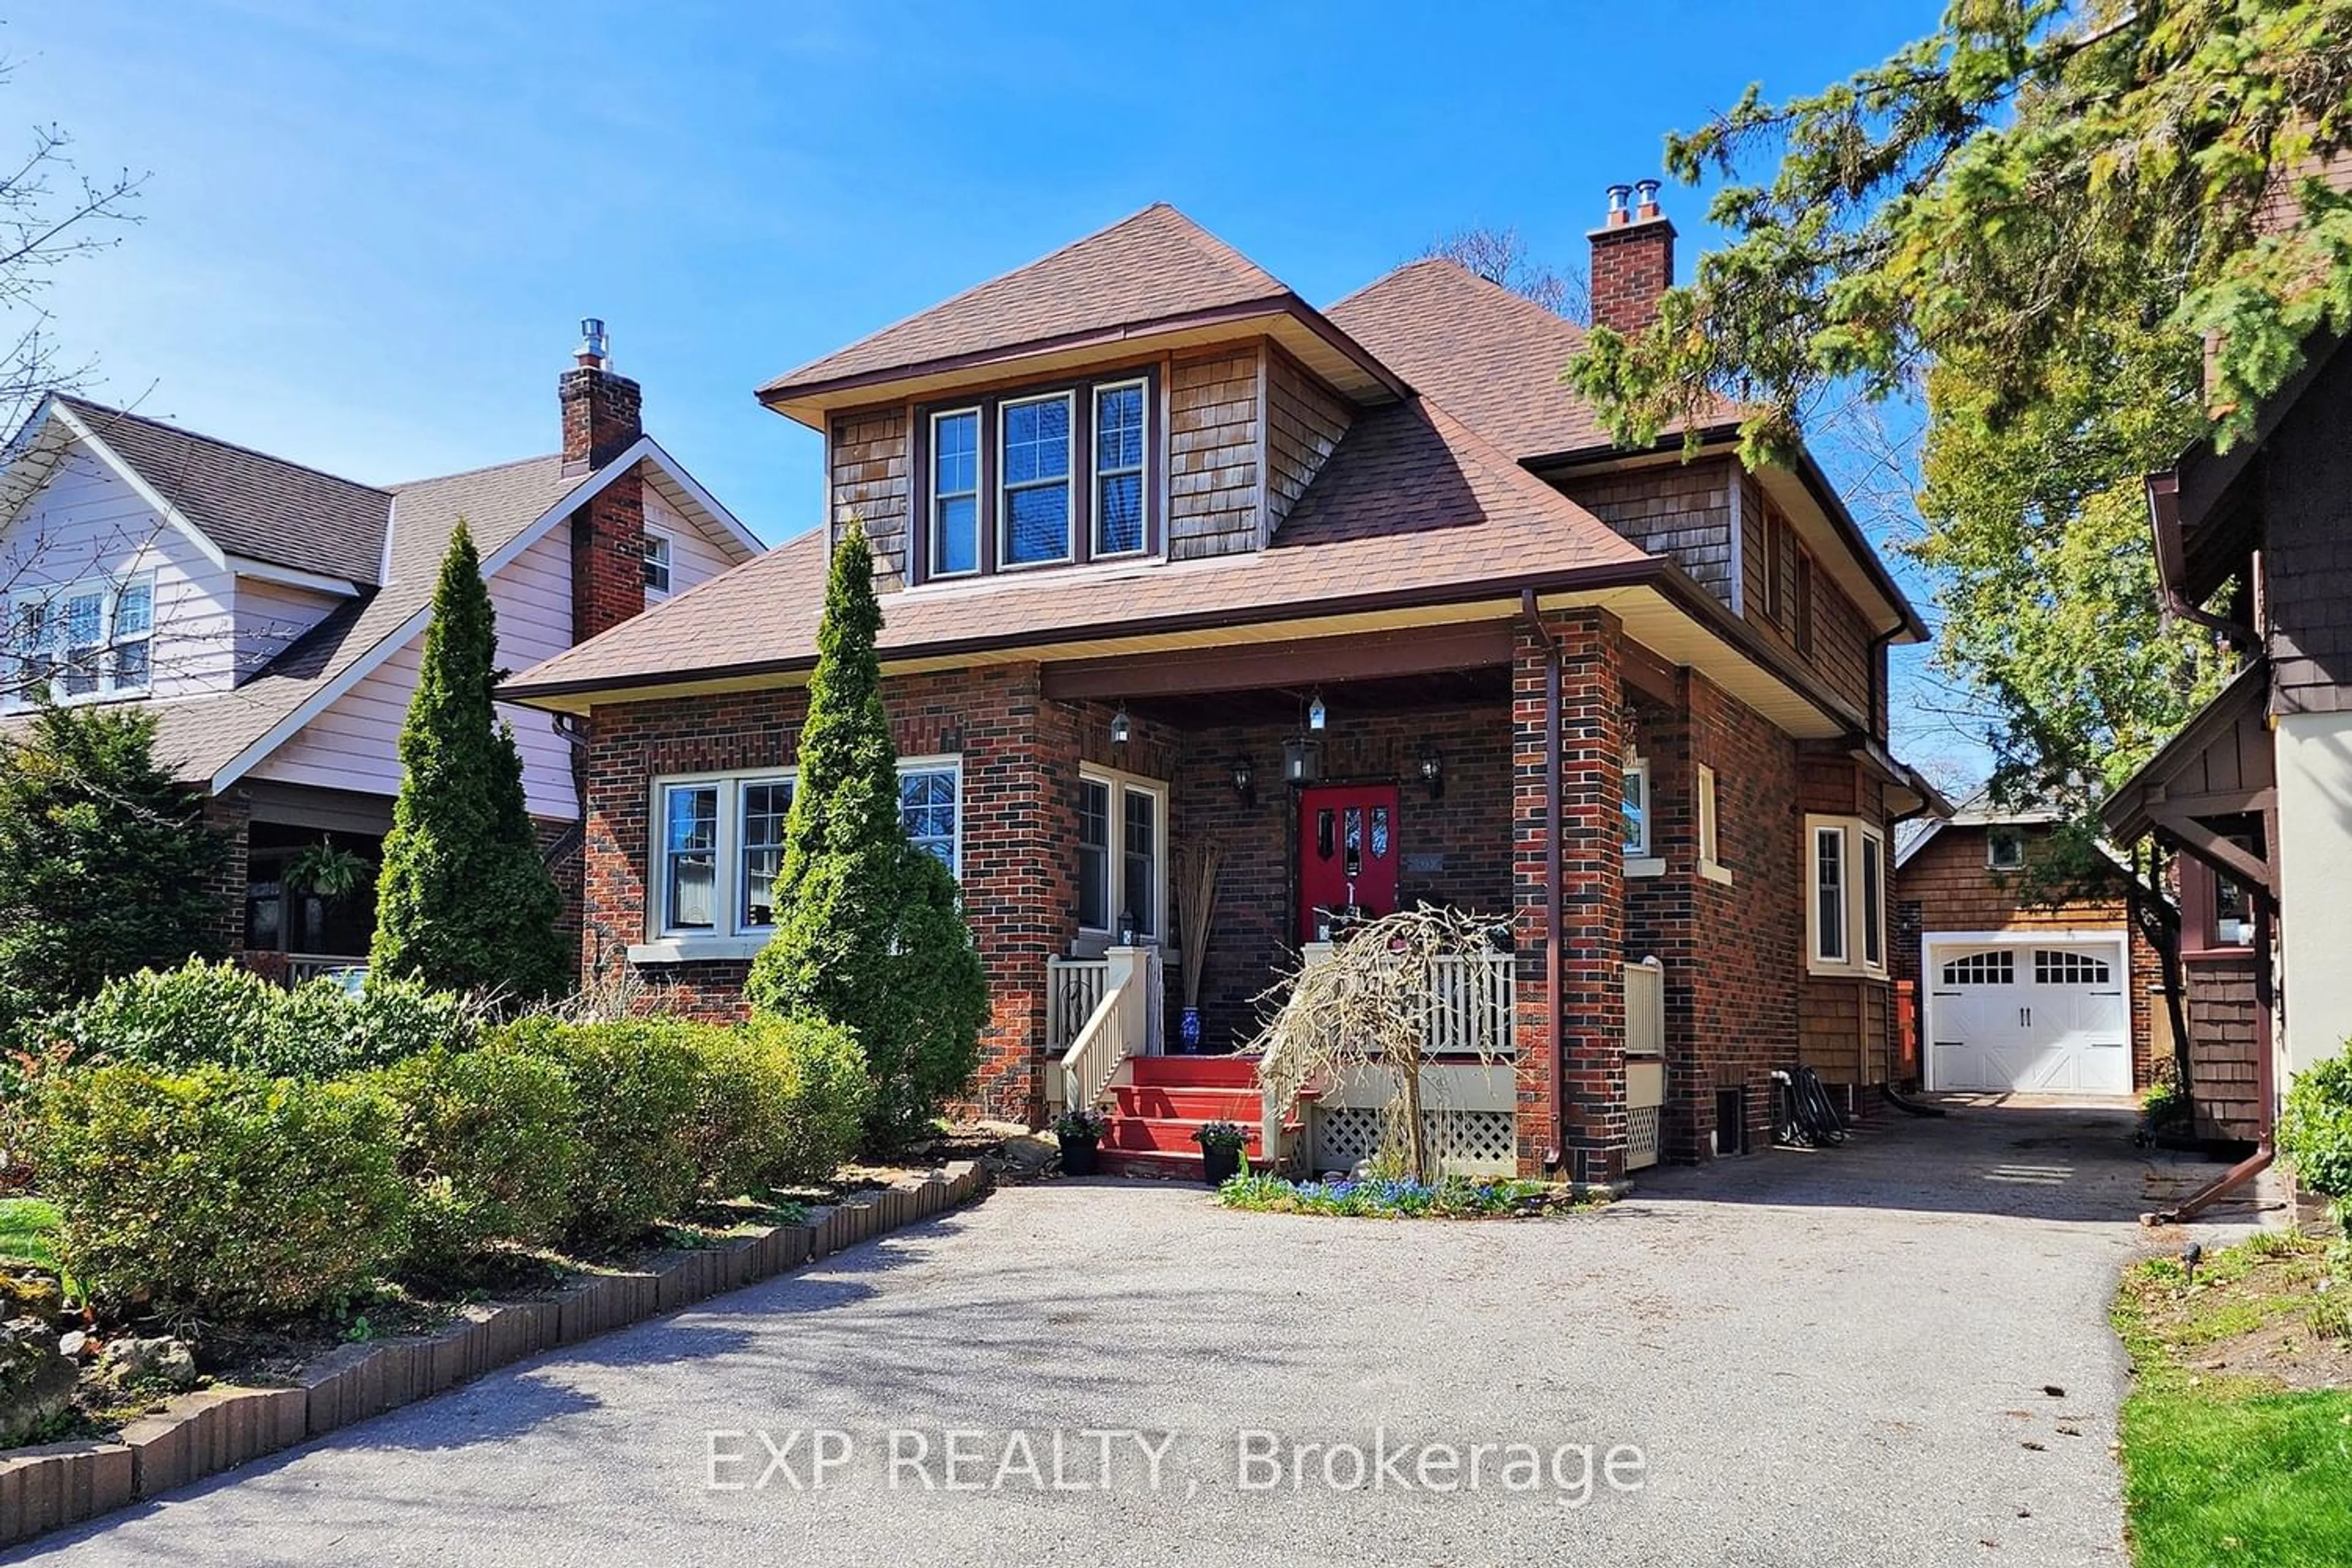 Home with brick exterior material for 398 Mary St, Oshawa Ontario L1G 5E1